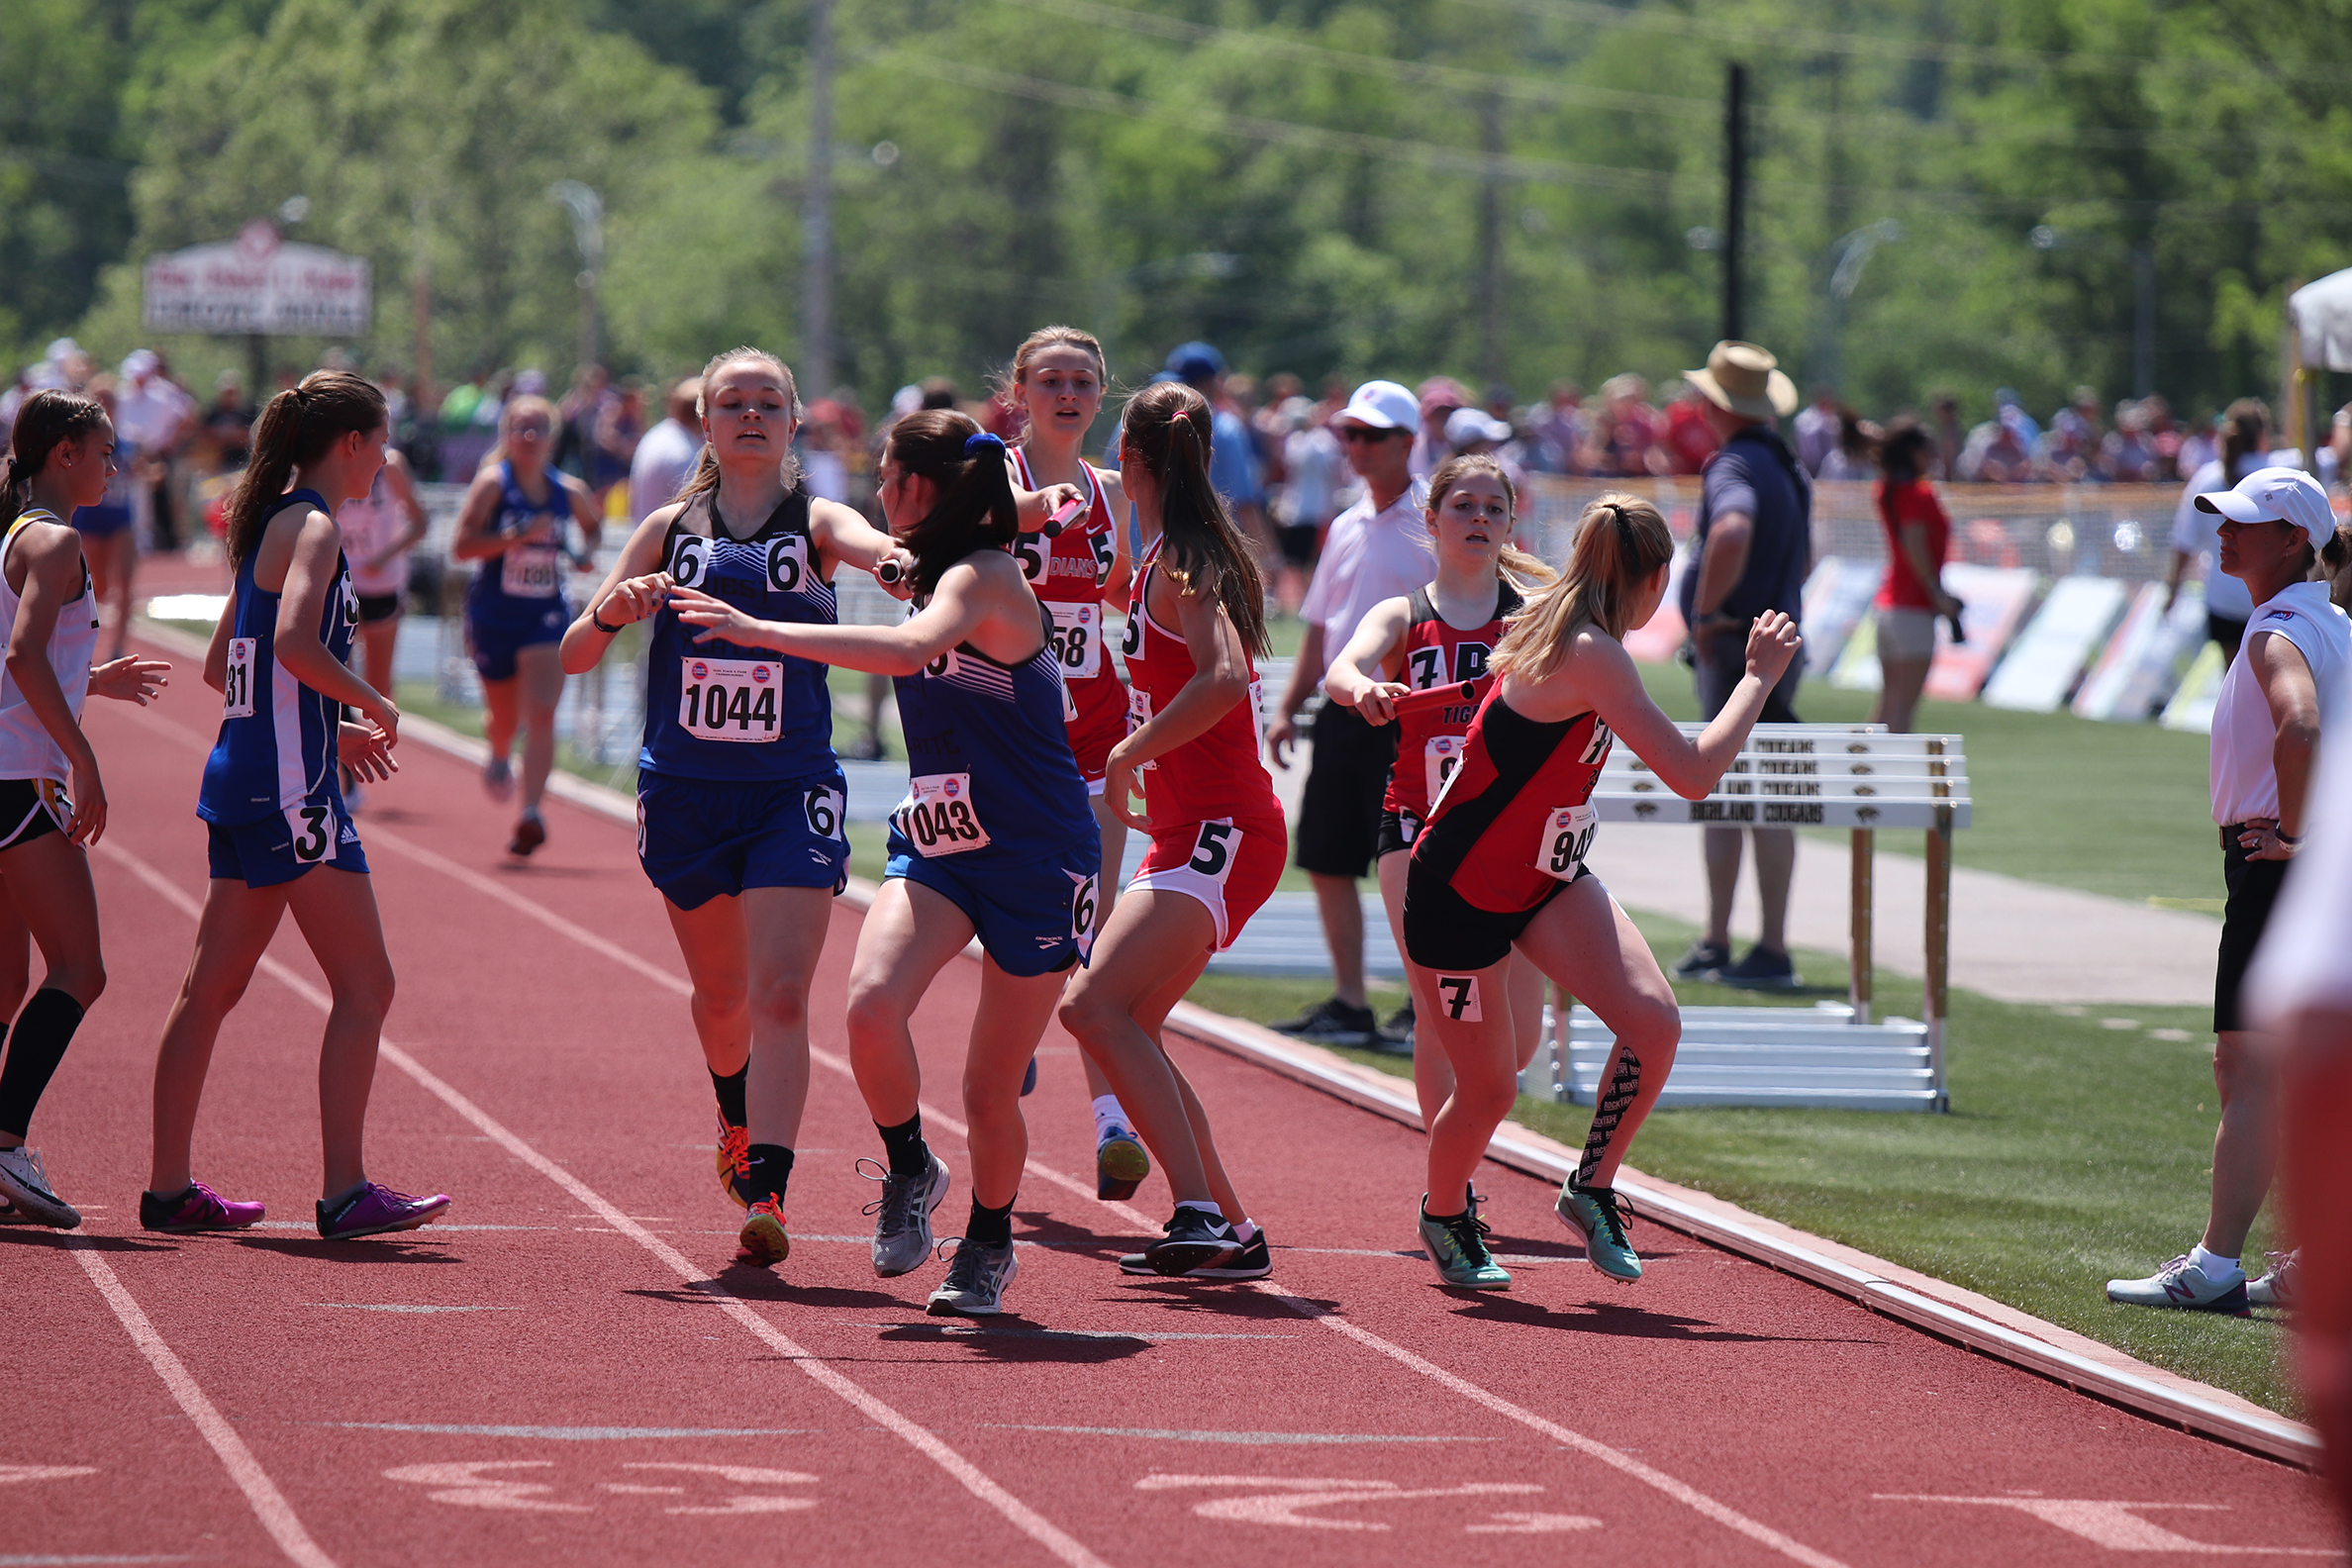 Class 2 MSHSAA State Track and Field Championships, 517/182019 — The